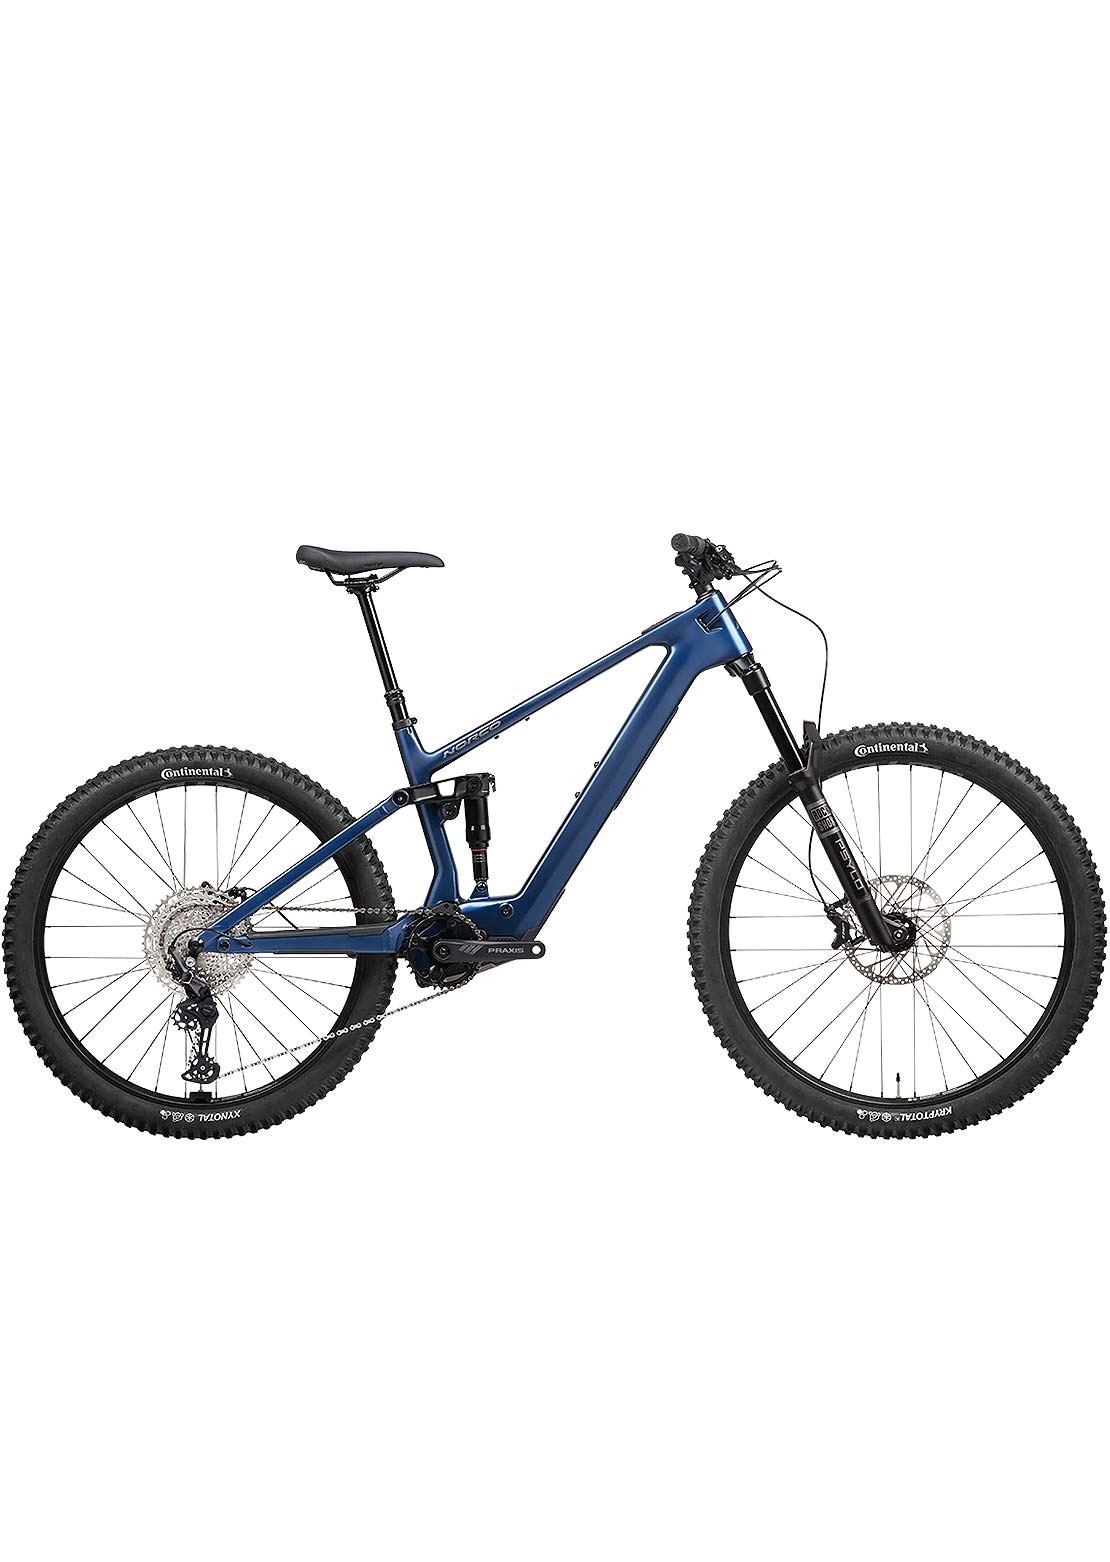 Norco Fluid VLT C3 140 Electric Mountain Bike - Battery not Included Blue